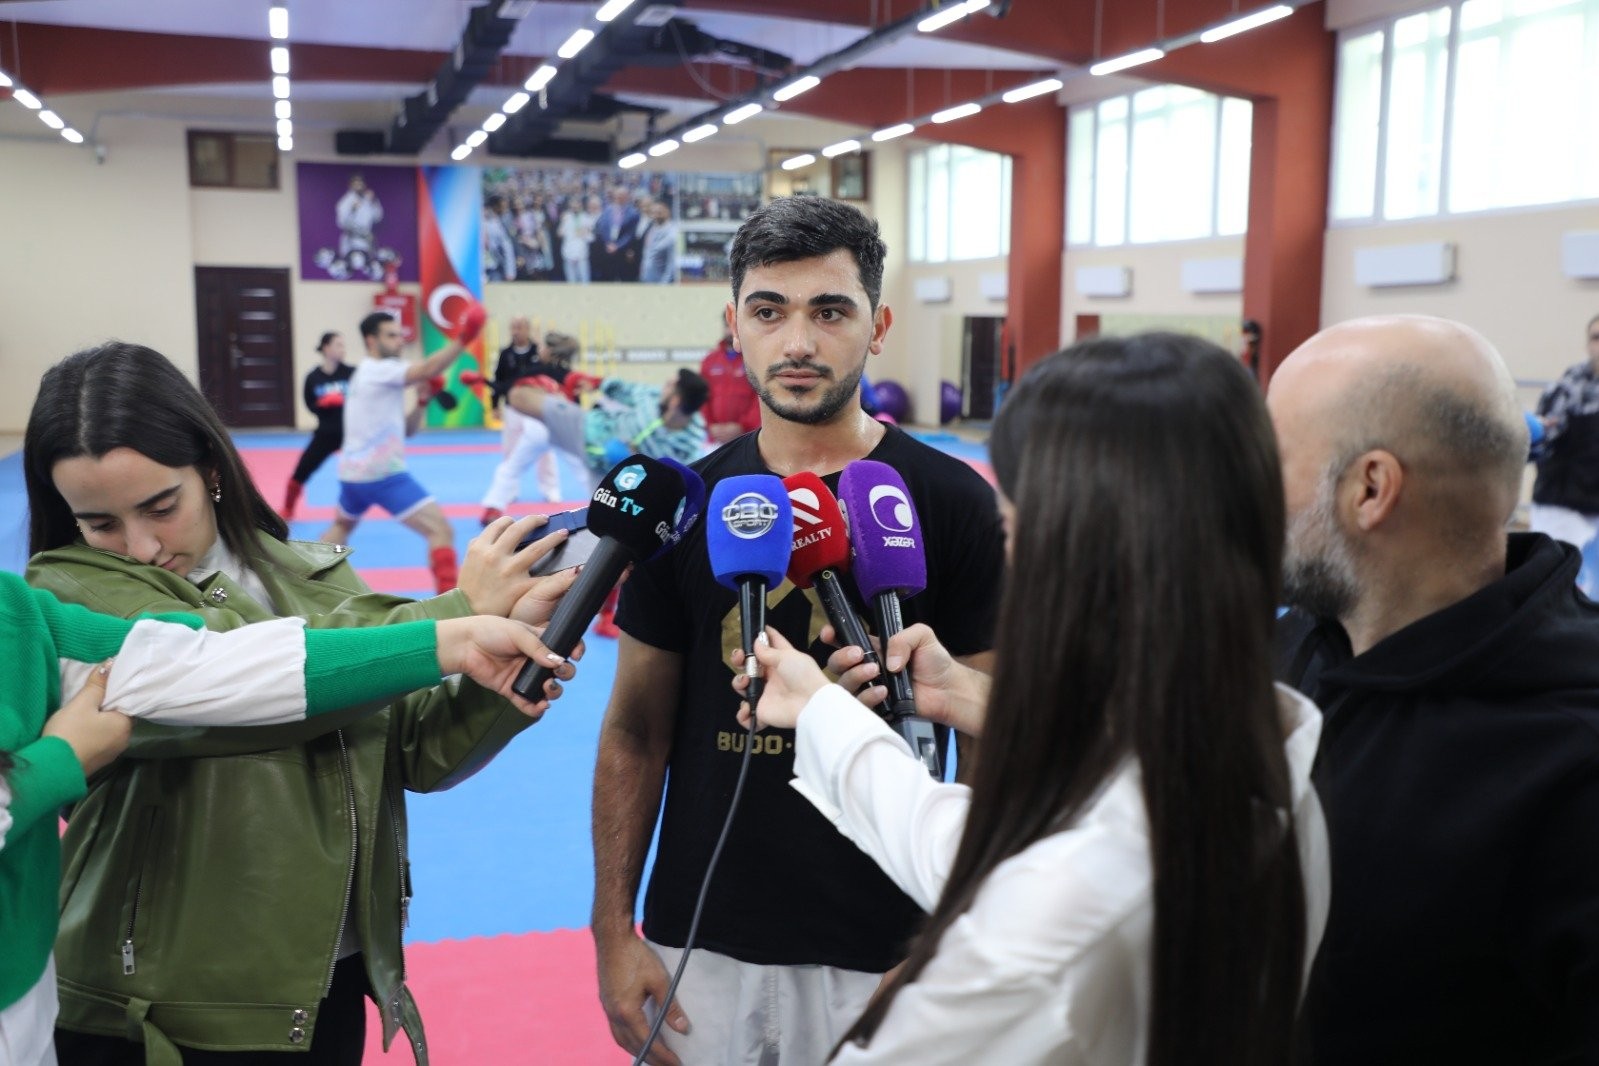 Tural Aghalarzade: "We are ready to win medals for the World Championship"